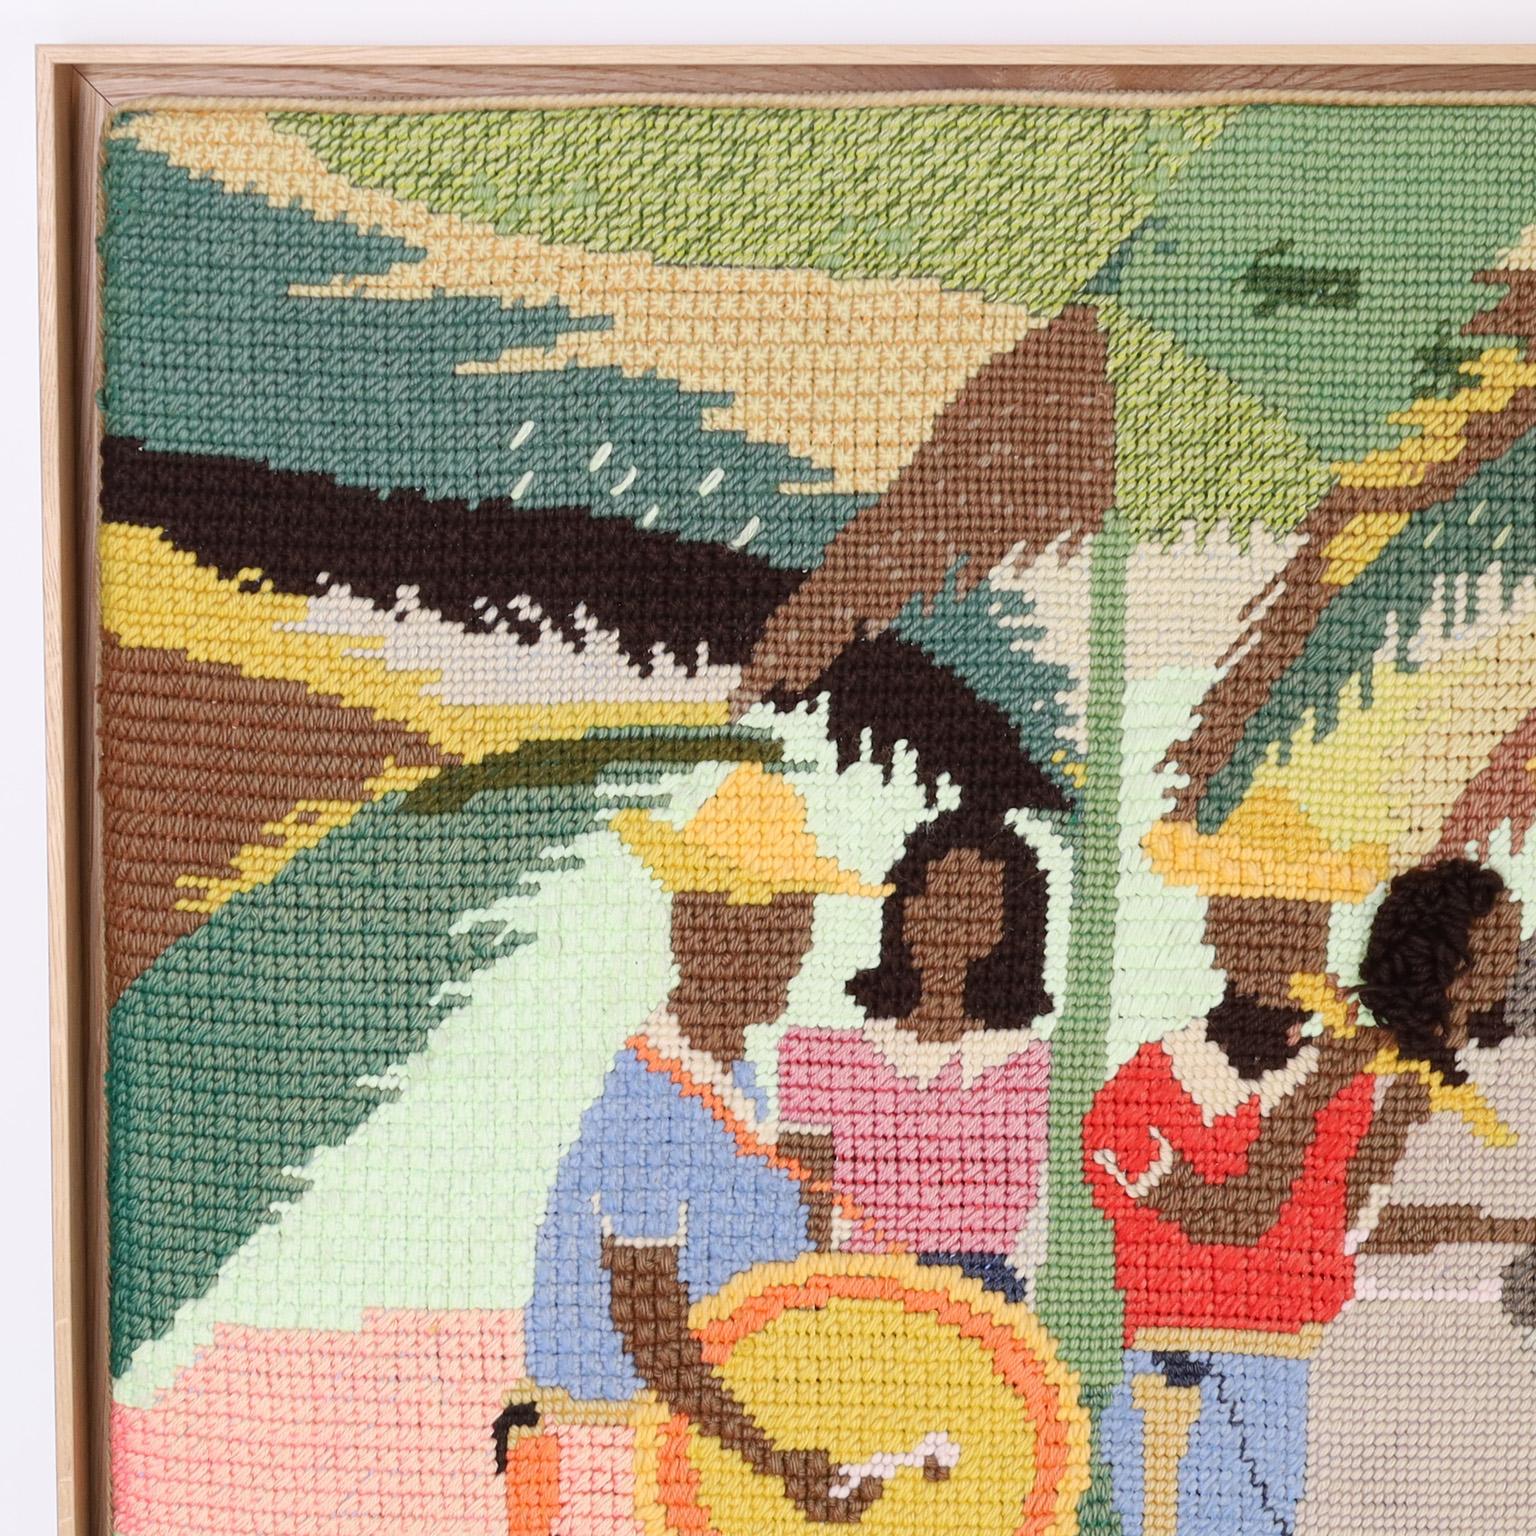 Mid century framed wall hanging depicting a lively bunch of musicians in a tropical setting ambitiously crafted in a needlepoint technique. Indistinctly signed in a palm leaf.